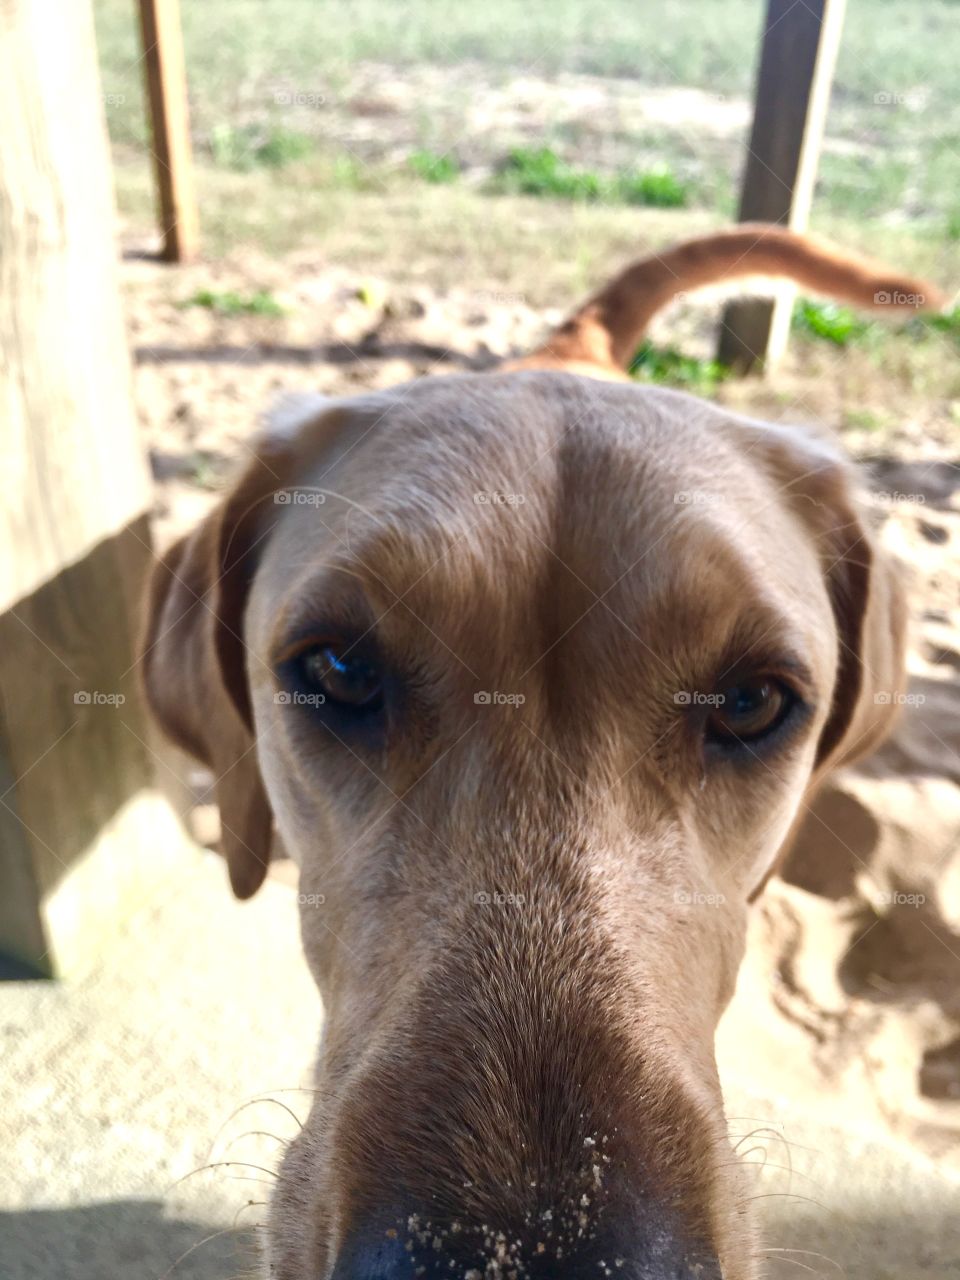 Puppy dog with sandy nose